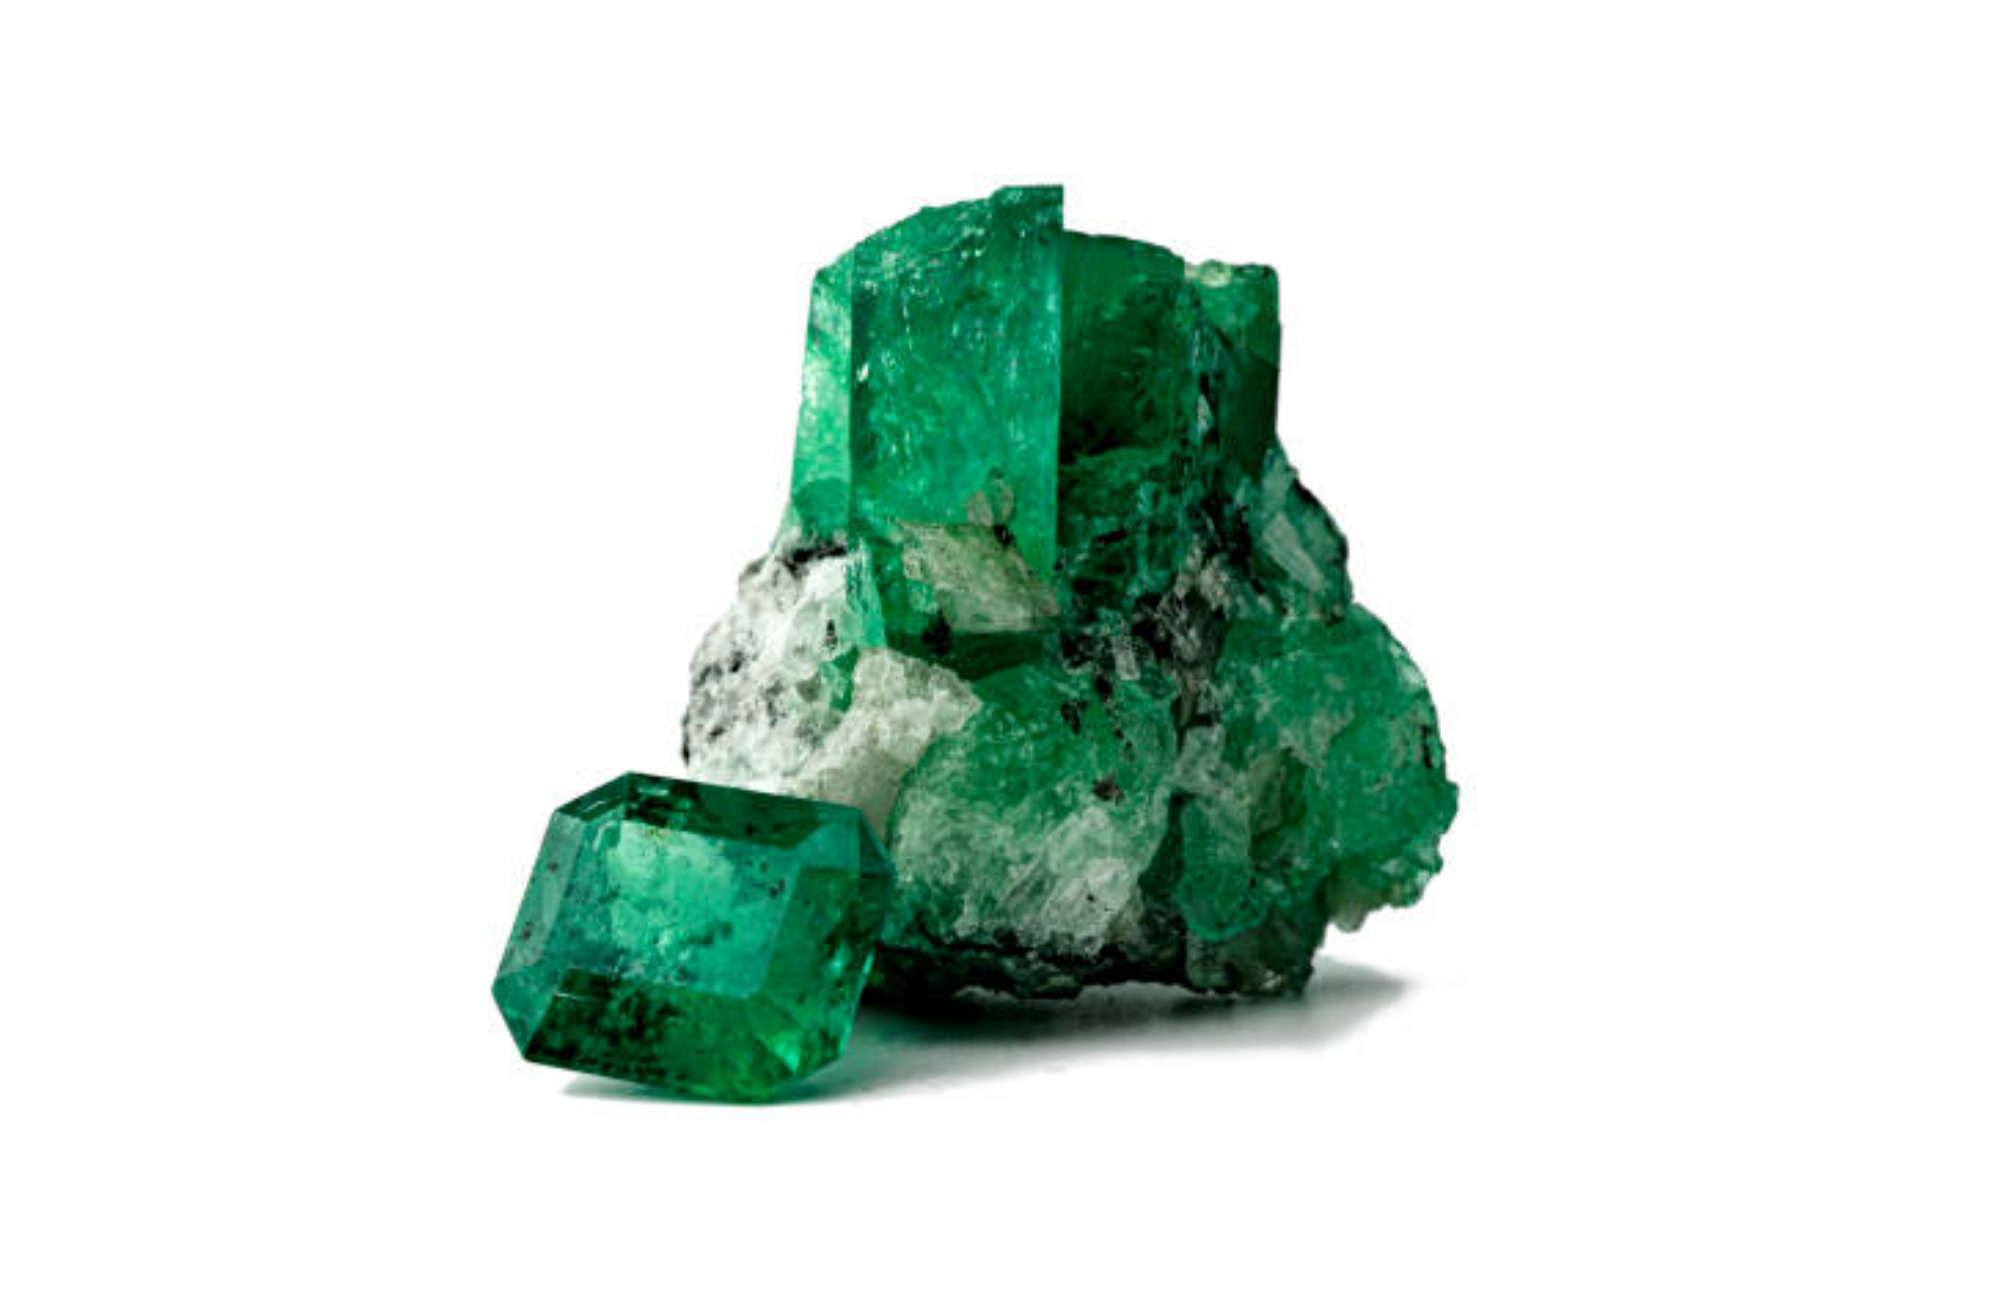 An octagonal emerald slightly inclined on a larger emerald that is still attached to its host rock